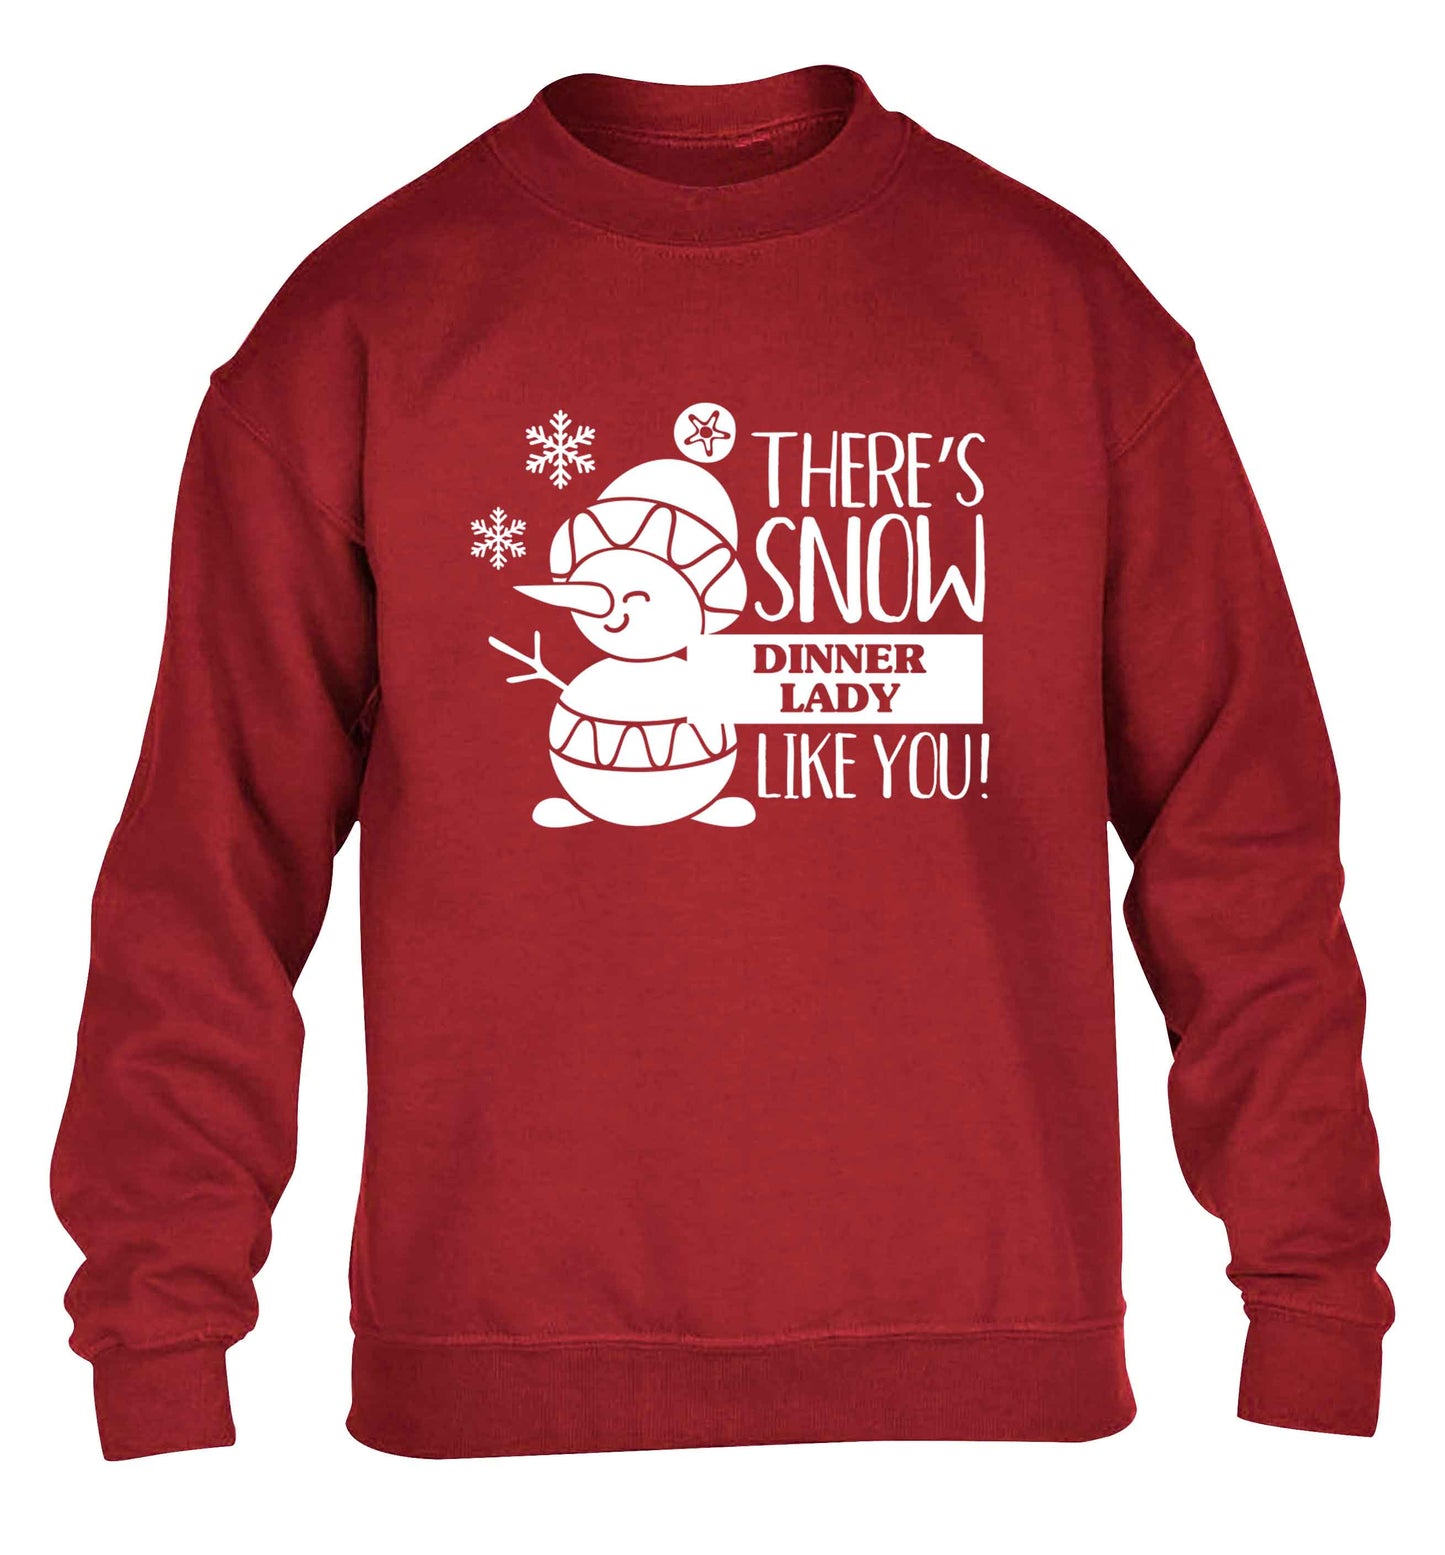 There's snow dinner lady like you children's grey sweater 12-13 Years